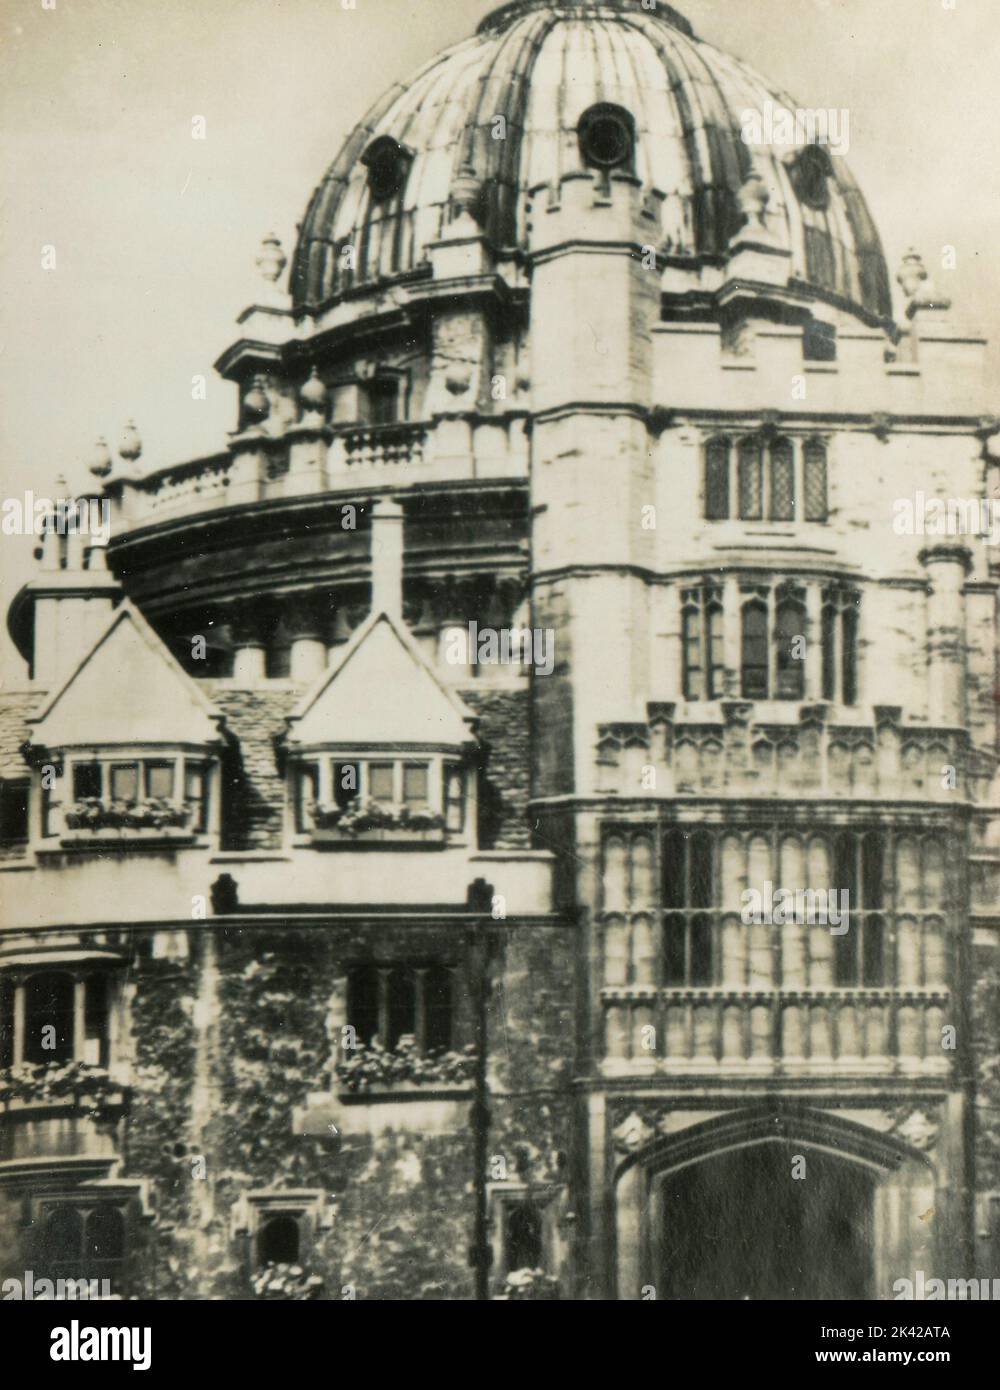 View of Brasenone College and Radcliffe Camera, Oxford, UK 1930s Stock Photo